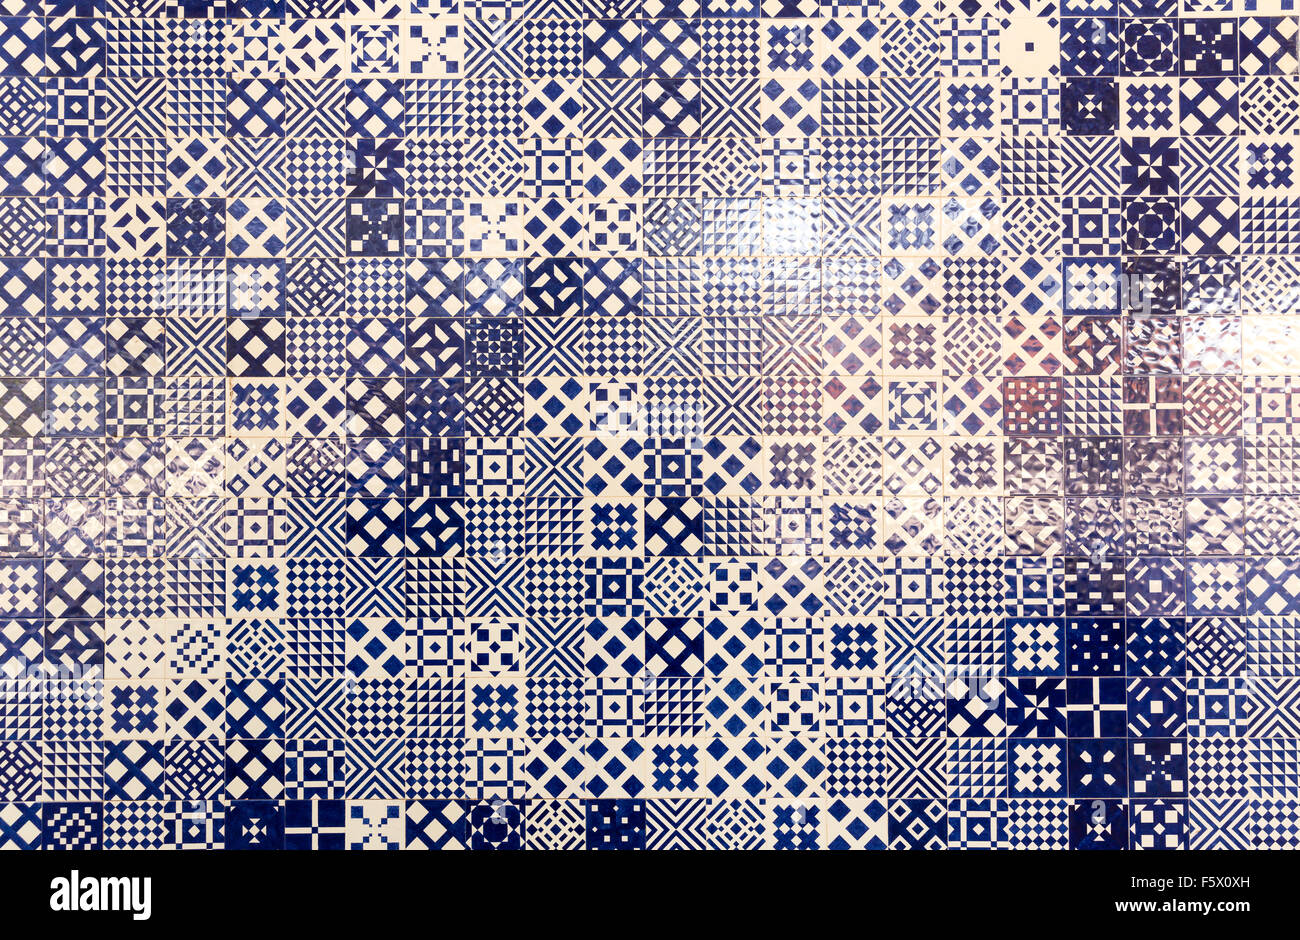 Abstract tile texture with many blue geometric patterns Stock Photo